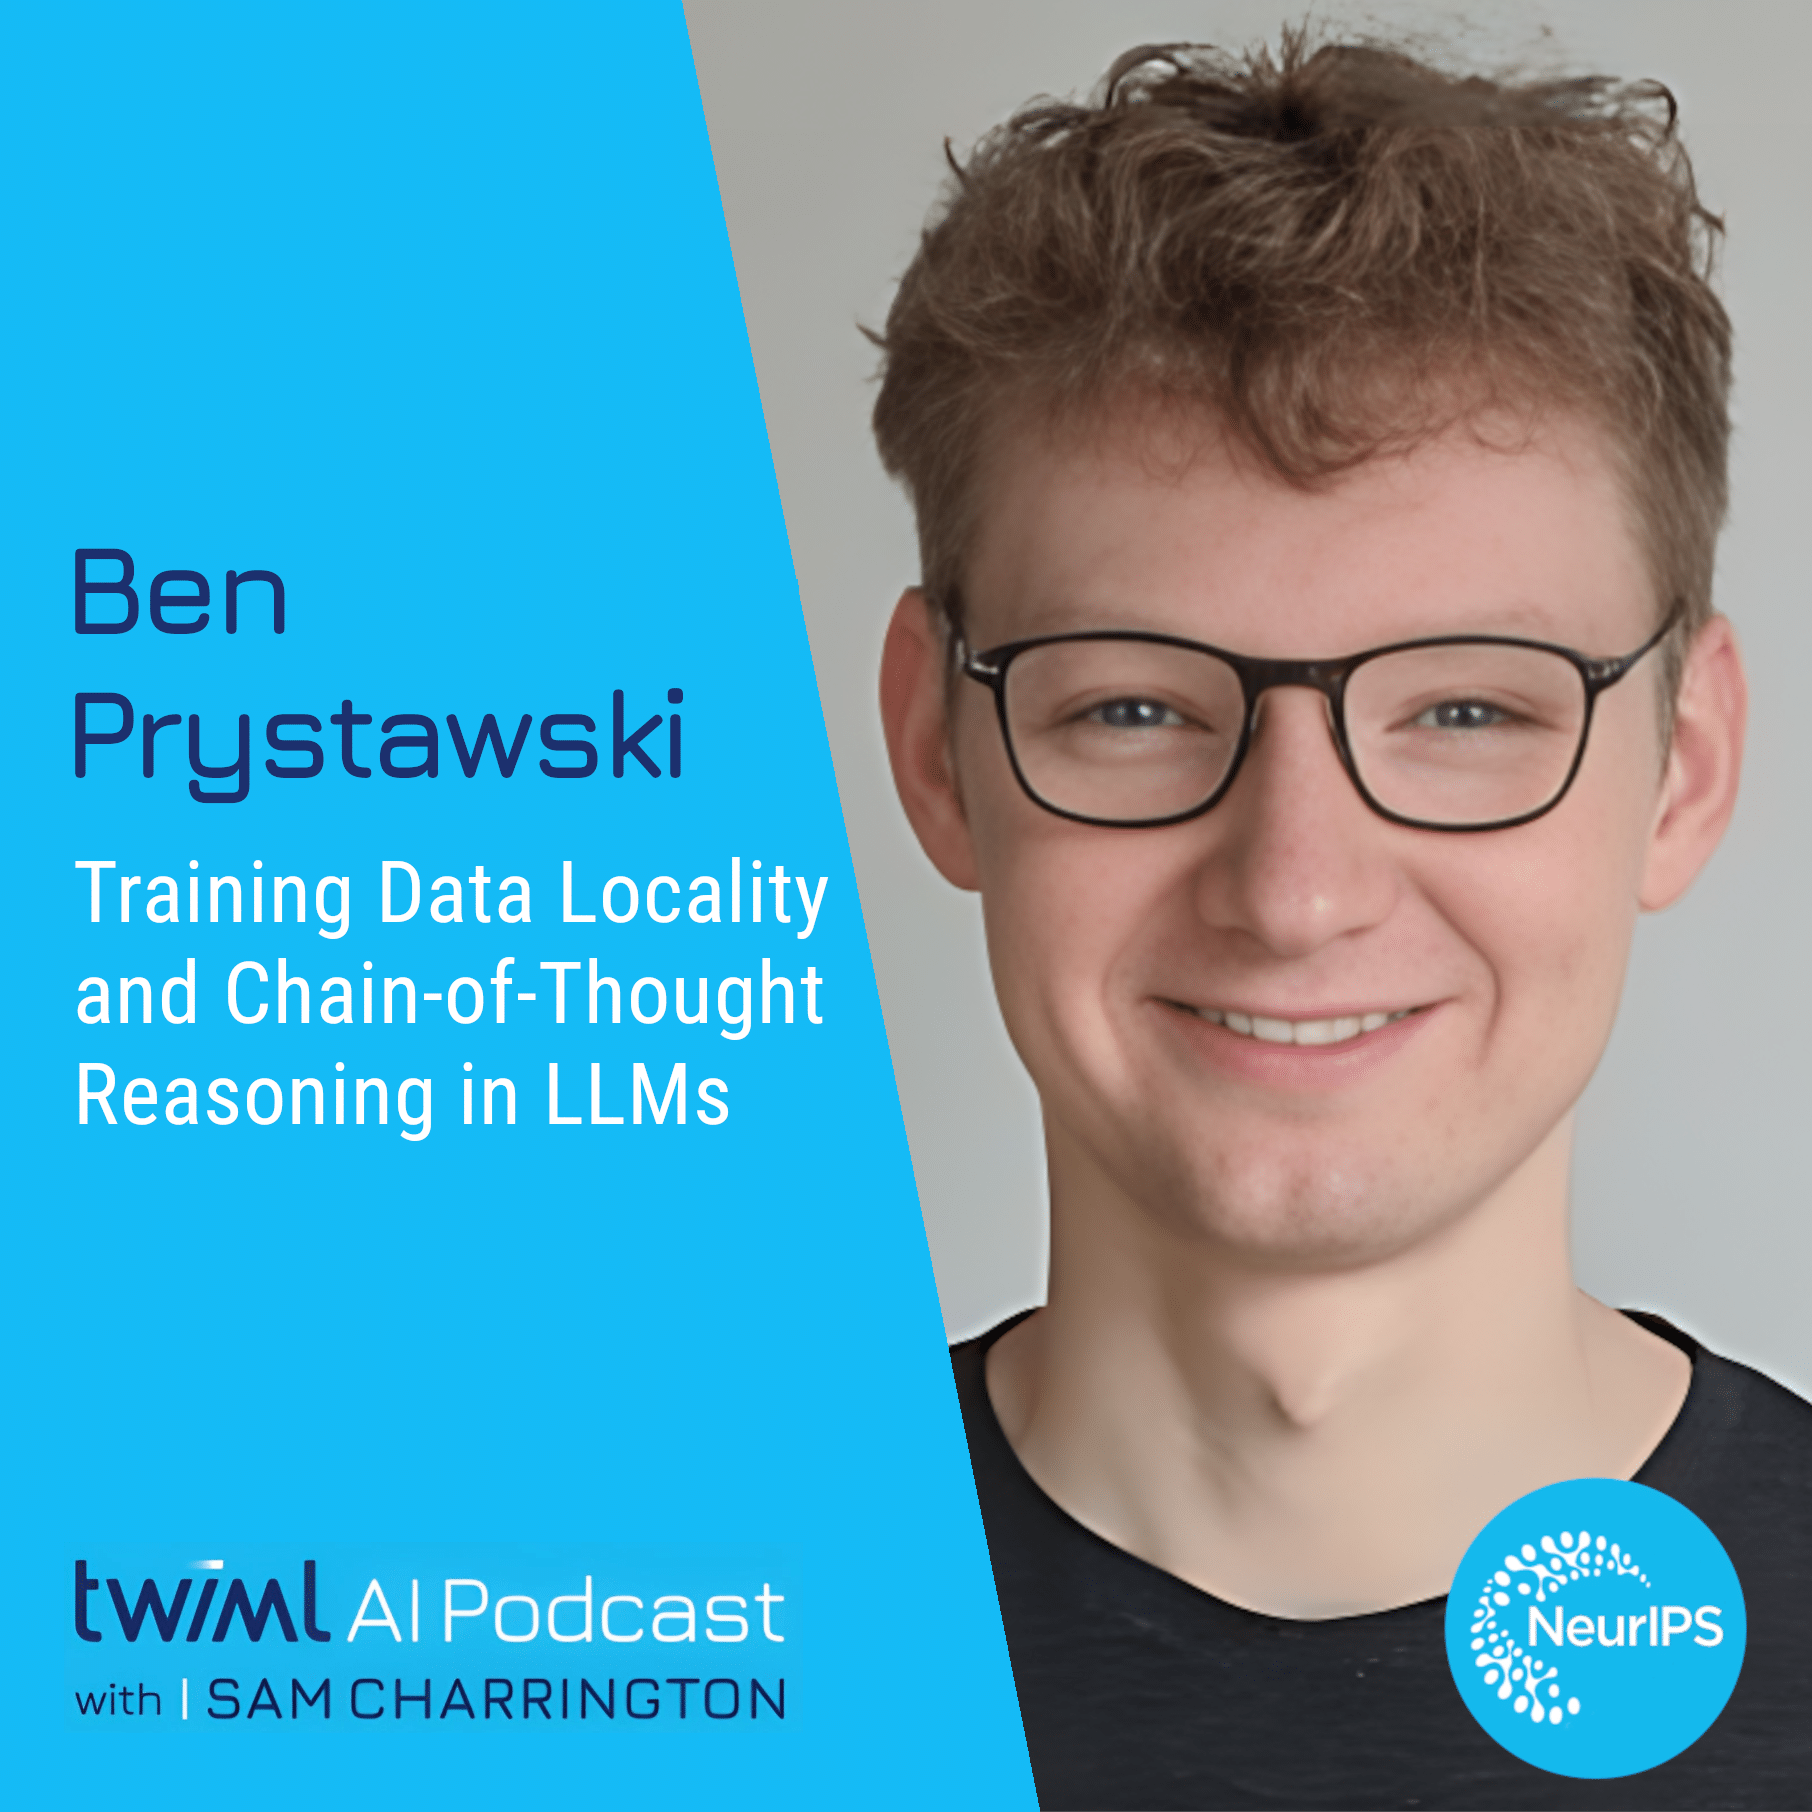 twiml-ben-prystawski-training-data-locality-and-chain-of-thought-reasoning-in-llms-sq